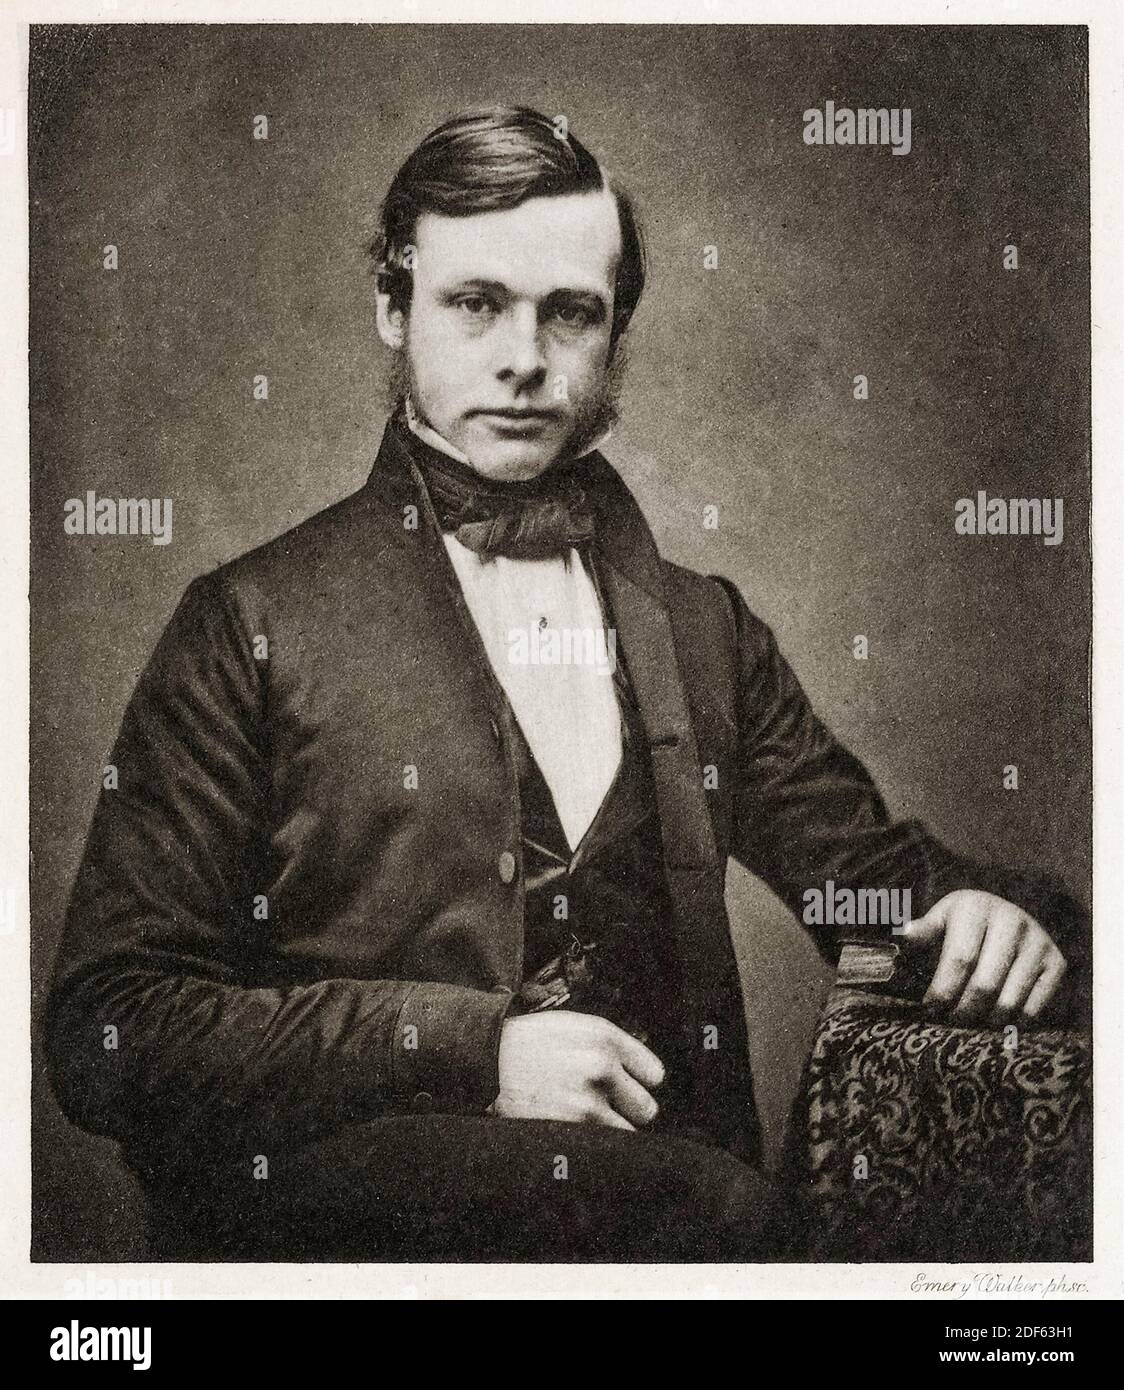 Joseph Lister, 1st Baron Lister (1827-1912), British surgeon and pioneer of antiseptic surgery, photogravure portrait engraving by Emery Walker, circa 1855 Stock Photo